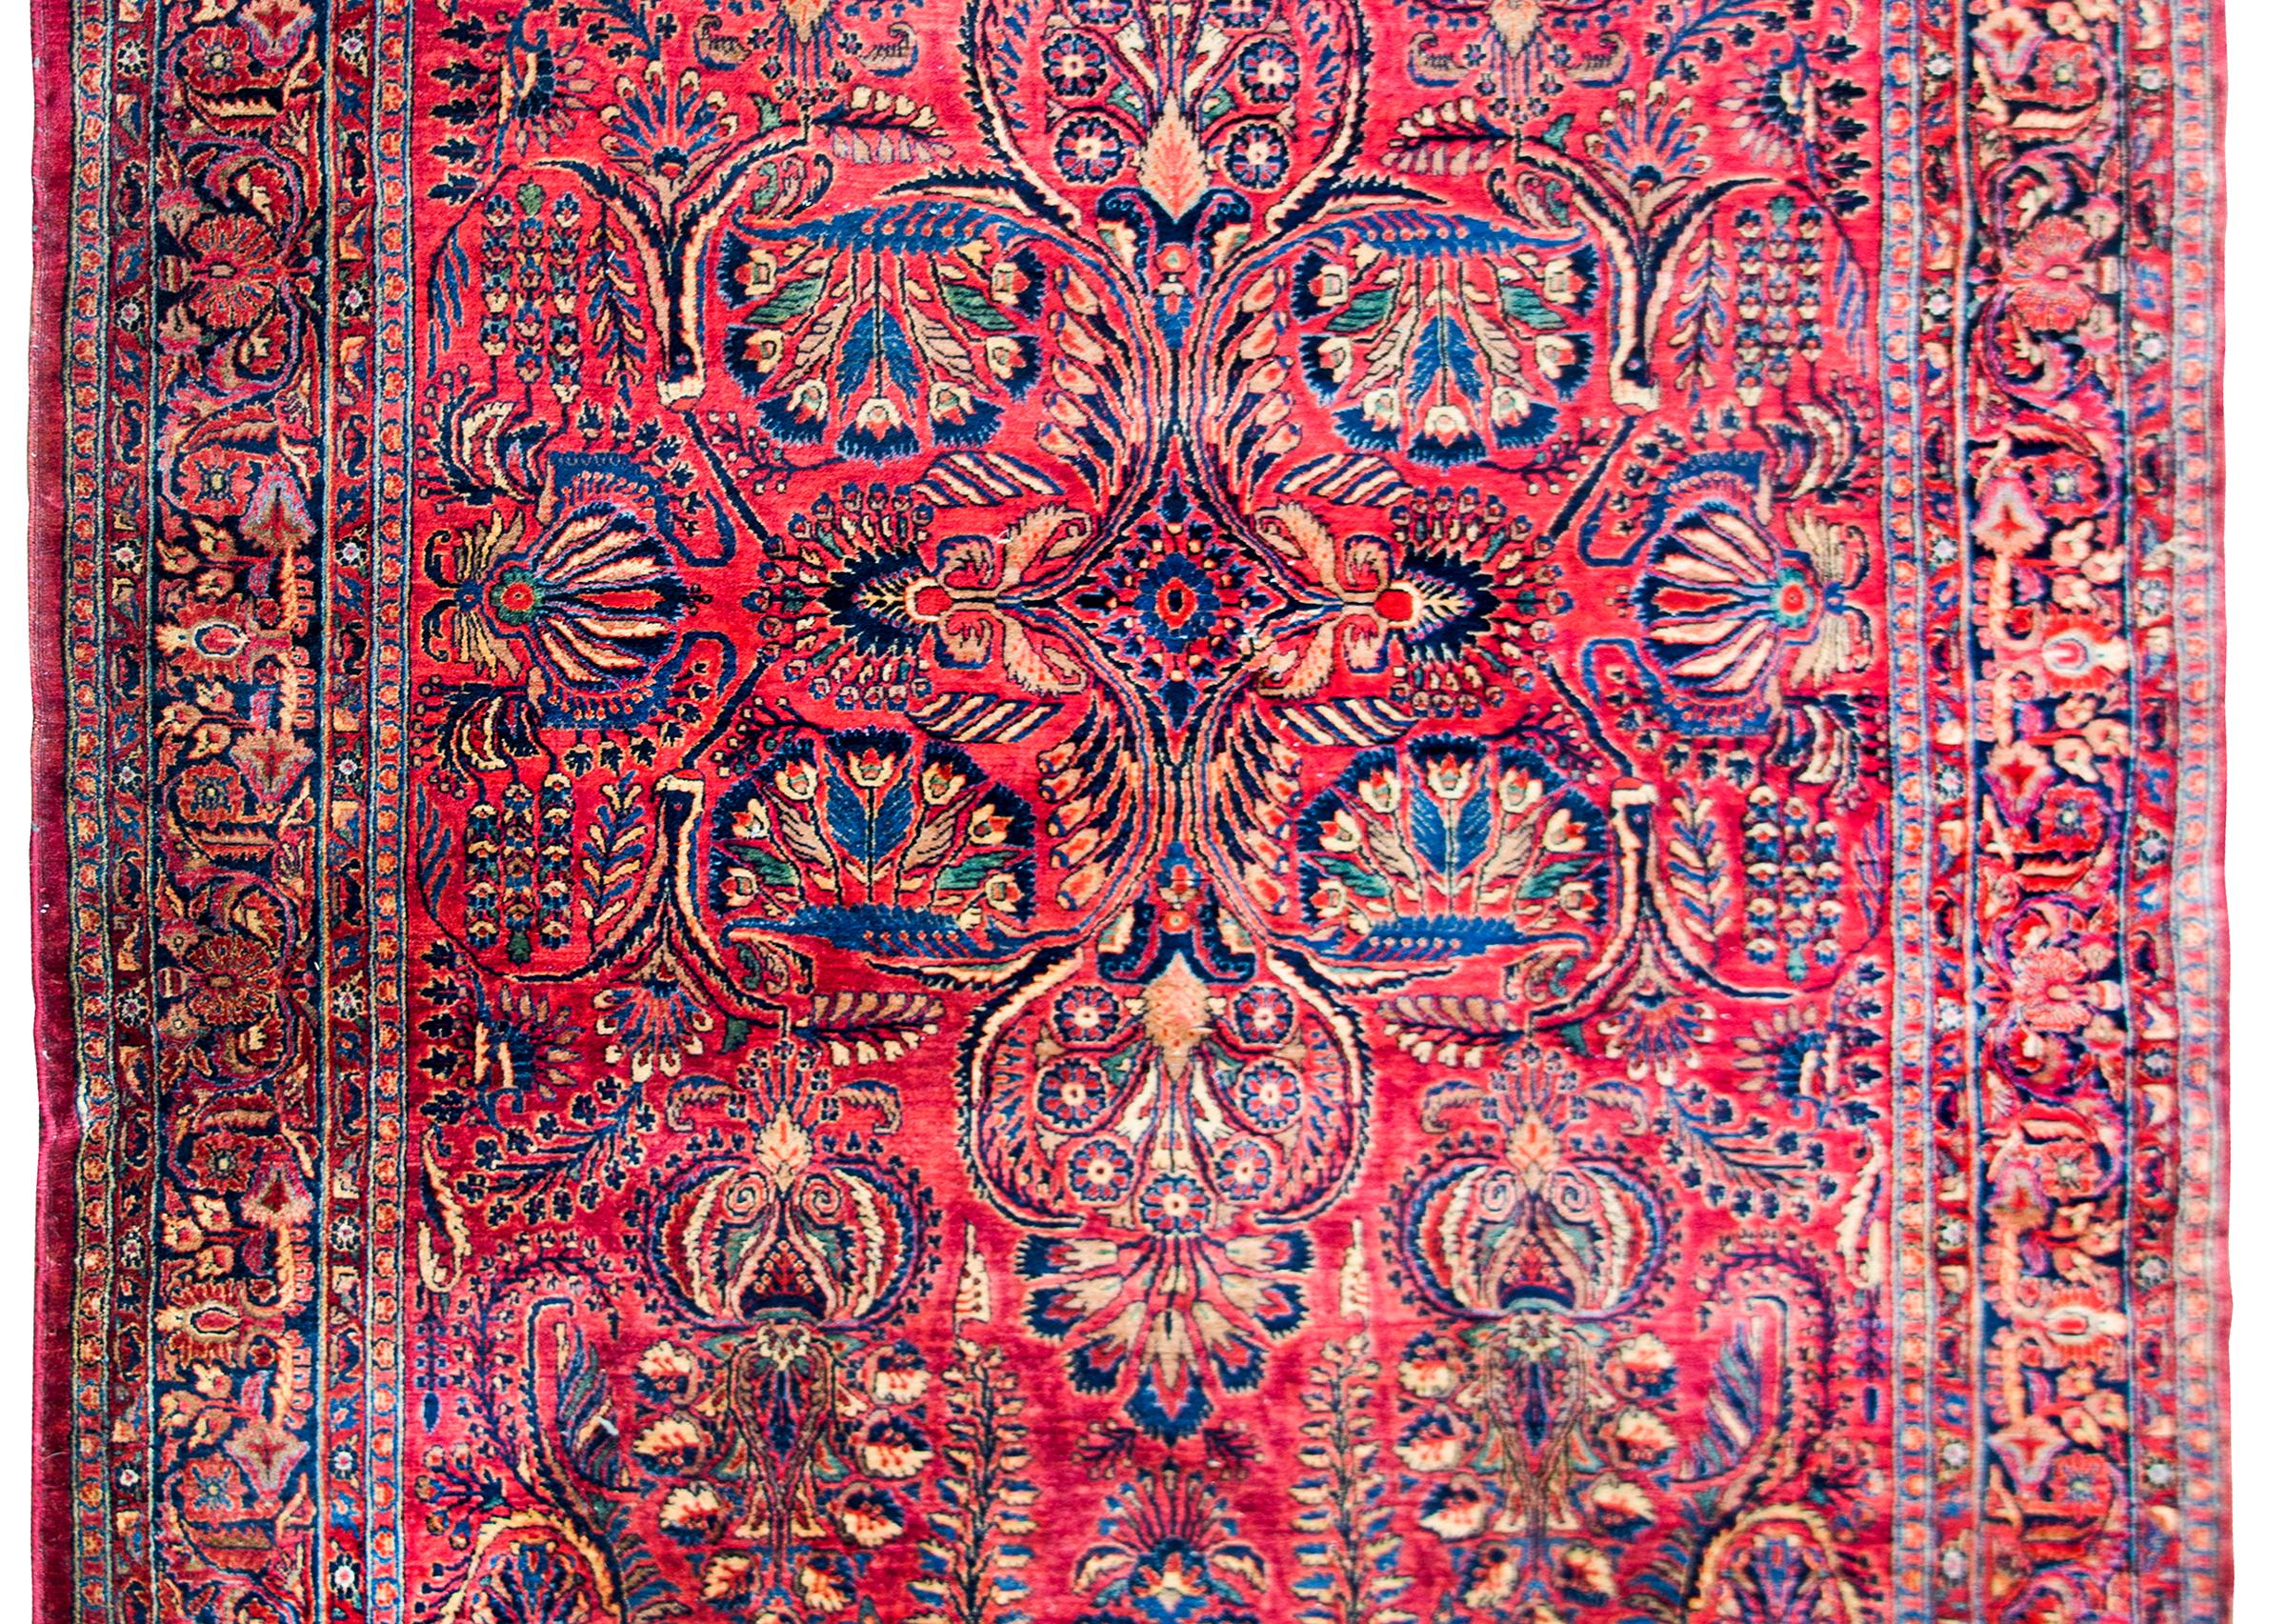 A stunning and rare early 20th century Persian Sarouk rug with the most incredible large-scale mirrored floral pattern containing myriad floral clusters that mimic peacock tails, all woven in light and dark indigo, pink, white, green, and yellow set